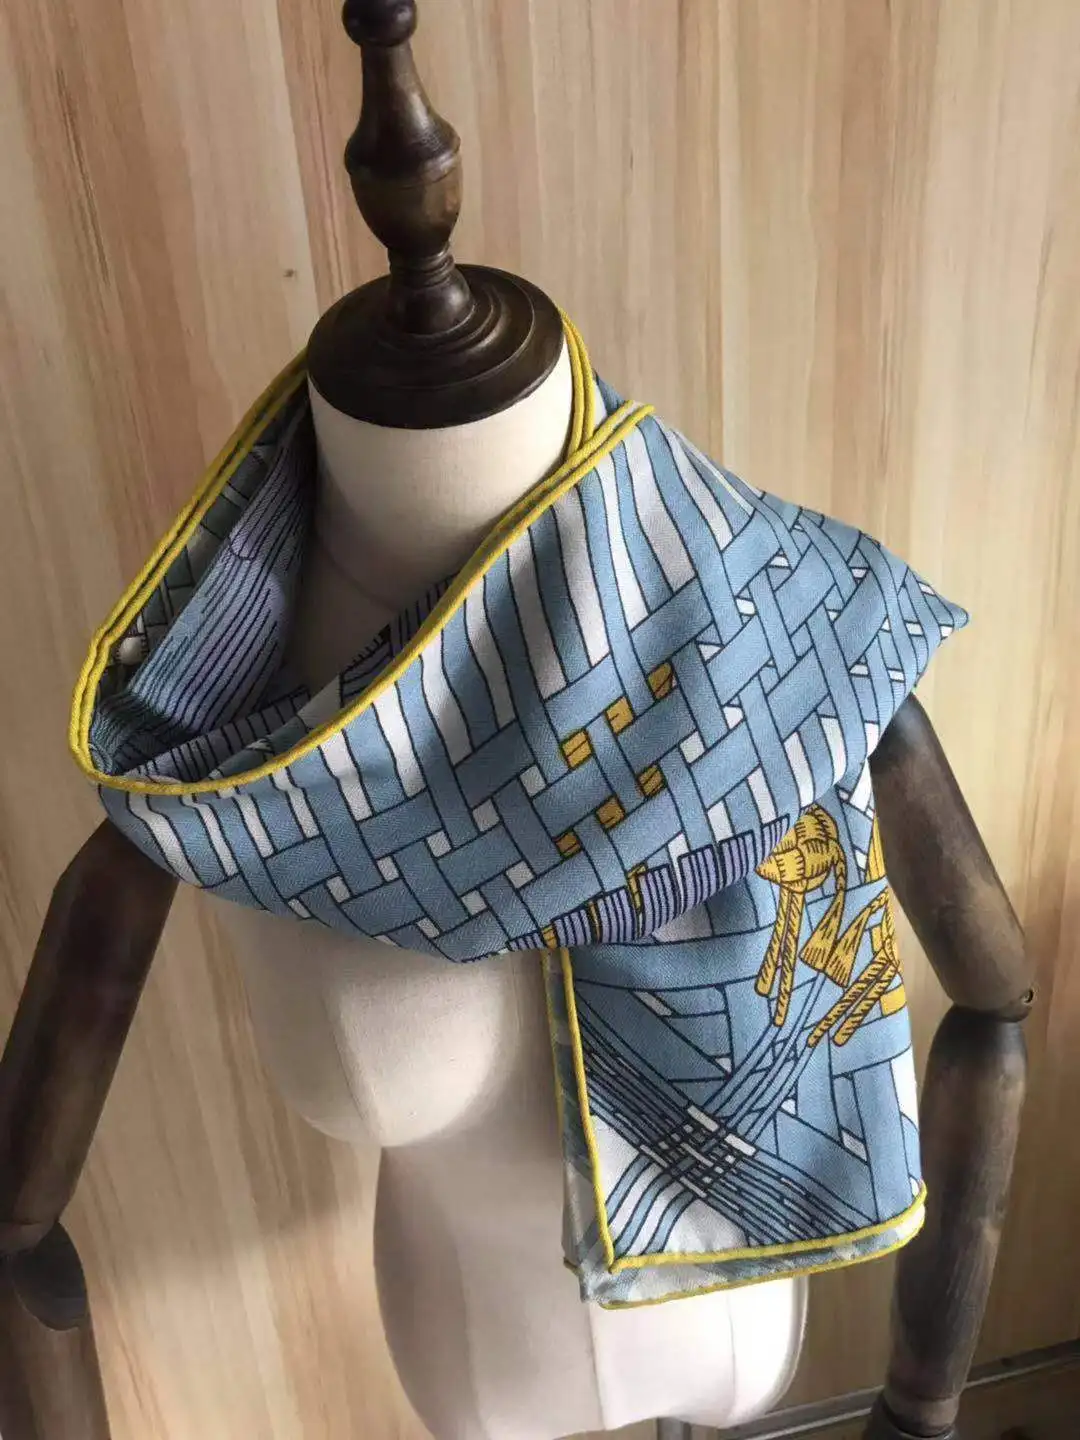 2020 new arrival autumn spring classic horse 140*140 cm colorful scarf 65% cashmere 35% silk scarf wrap for women lady girl